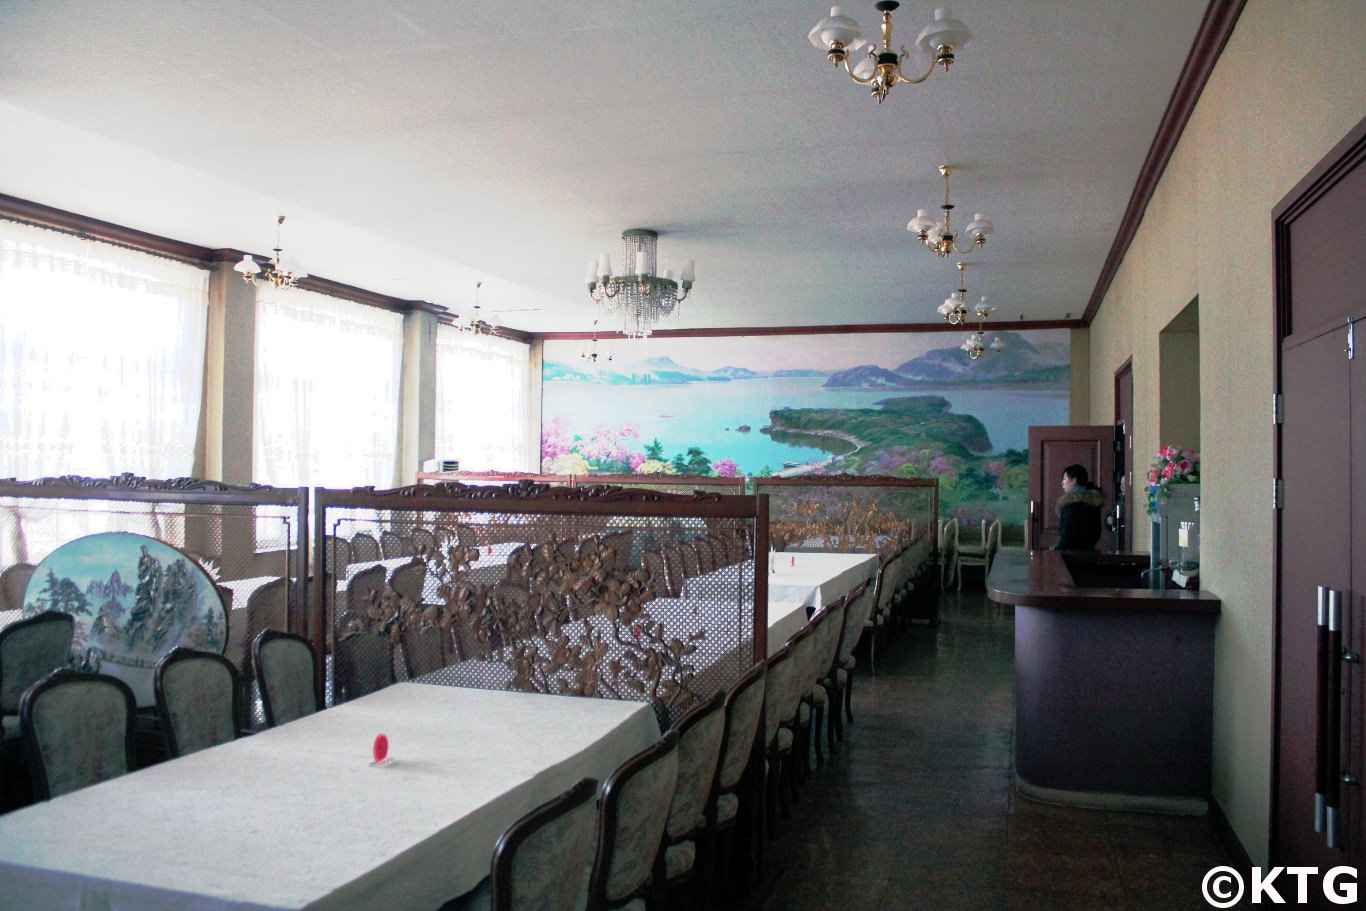 Mural painting at the Sariwon March 8 Hotel banquet hall, North Korea, DPRK. Picture taken by KTG Tours. This is a third class hotel. Sariwon is the provincial capital of North Hwanghae Province.